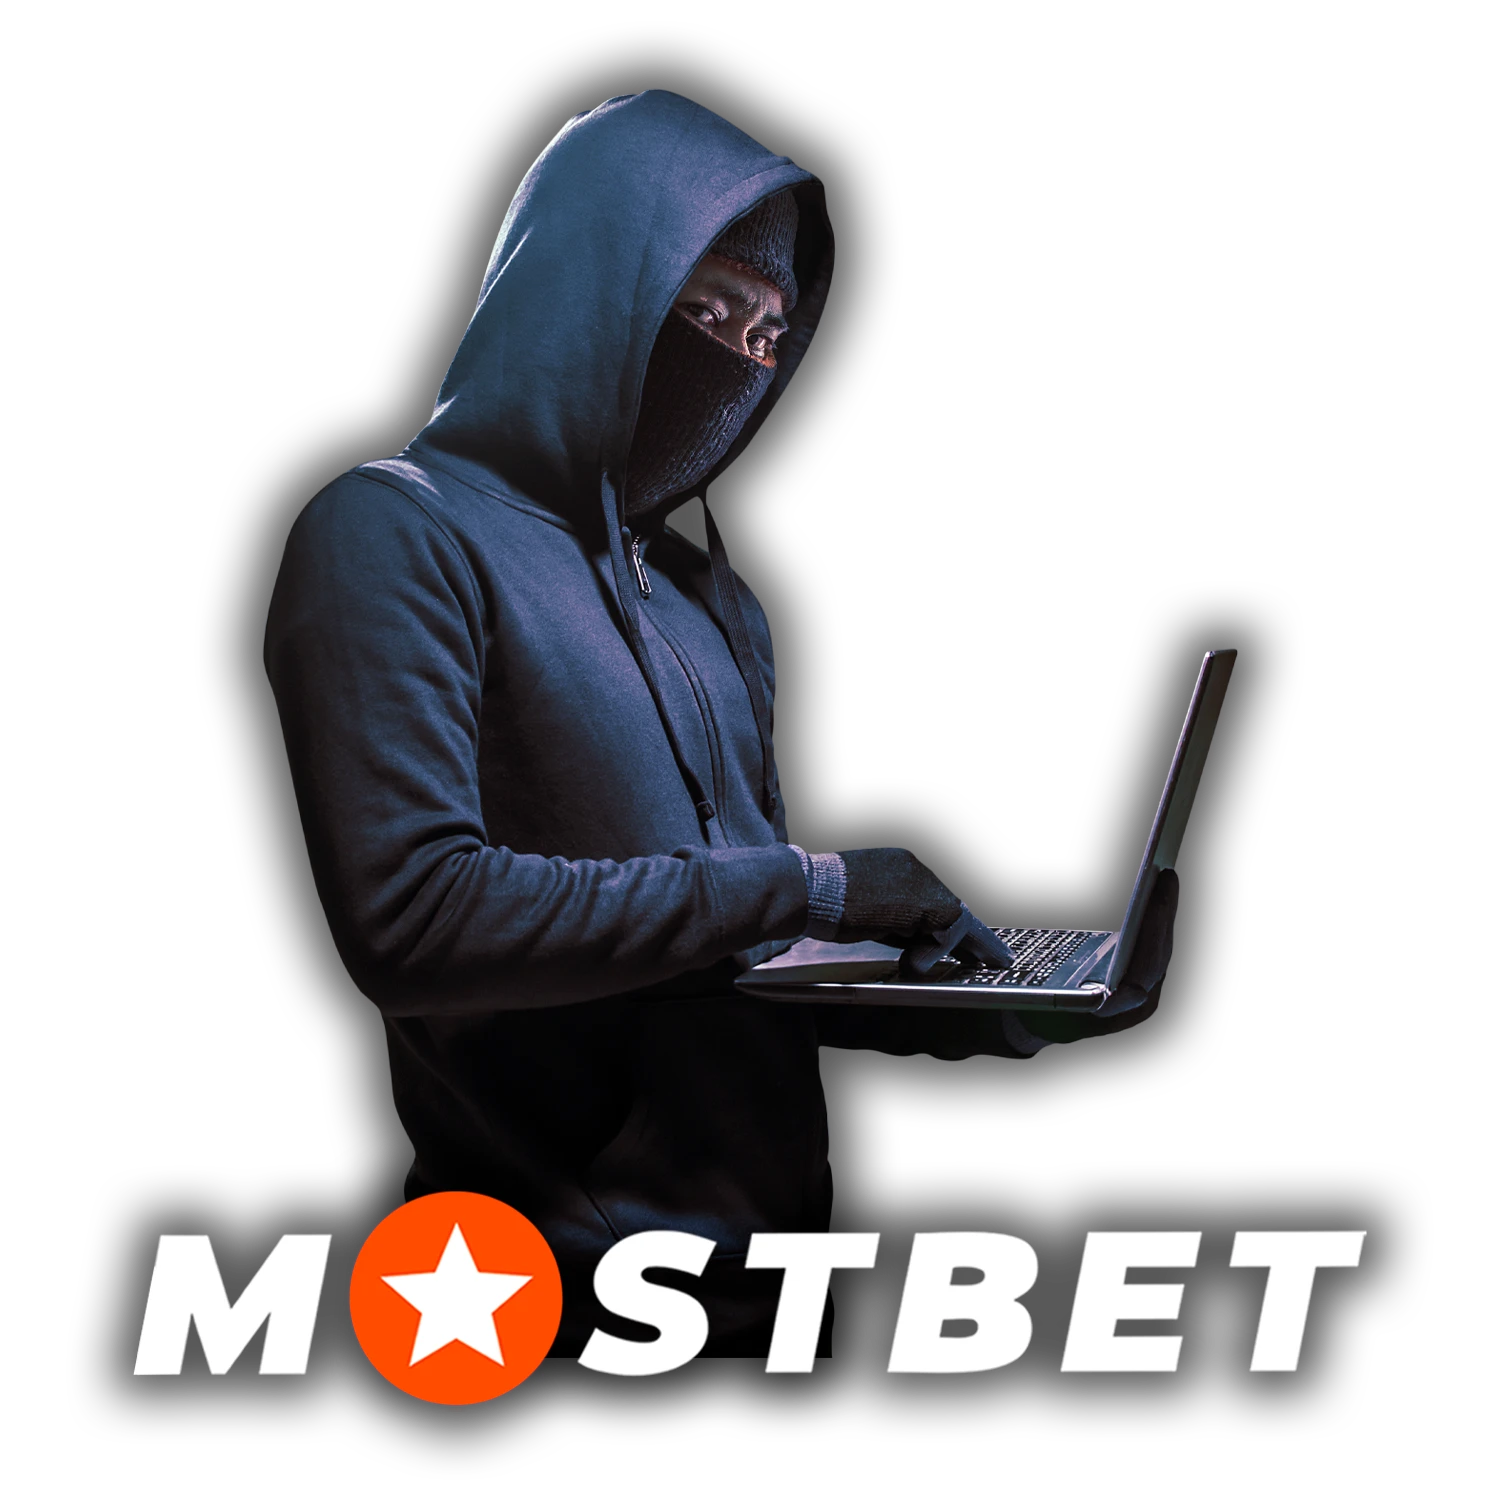 Learn how to avoid fraud when betting on Mostbet.